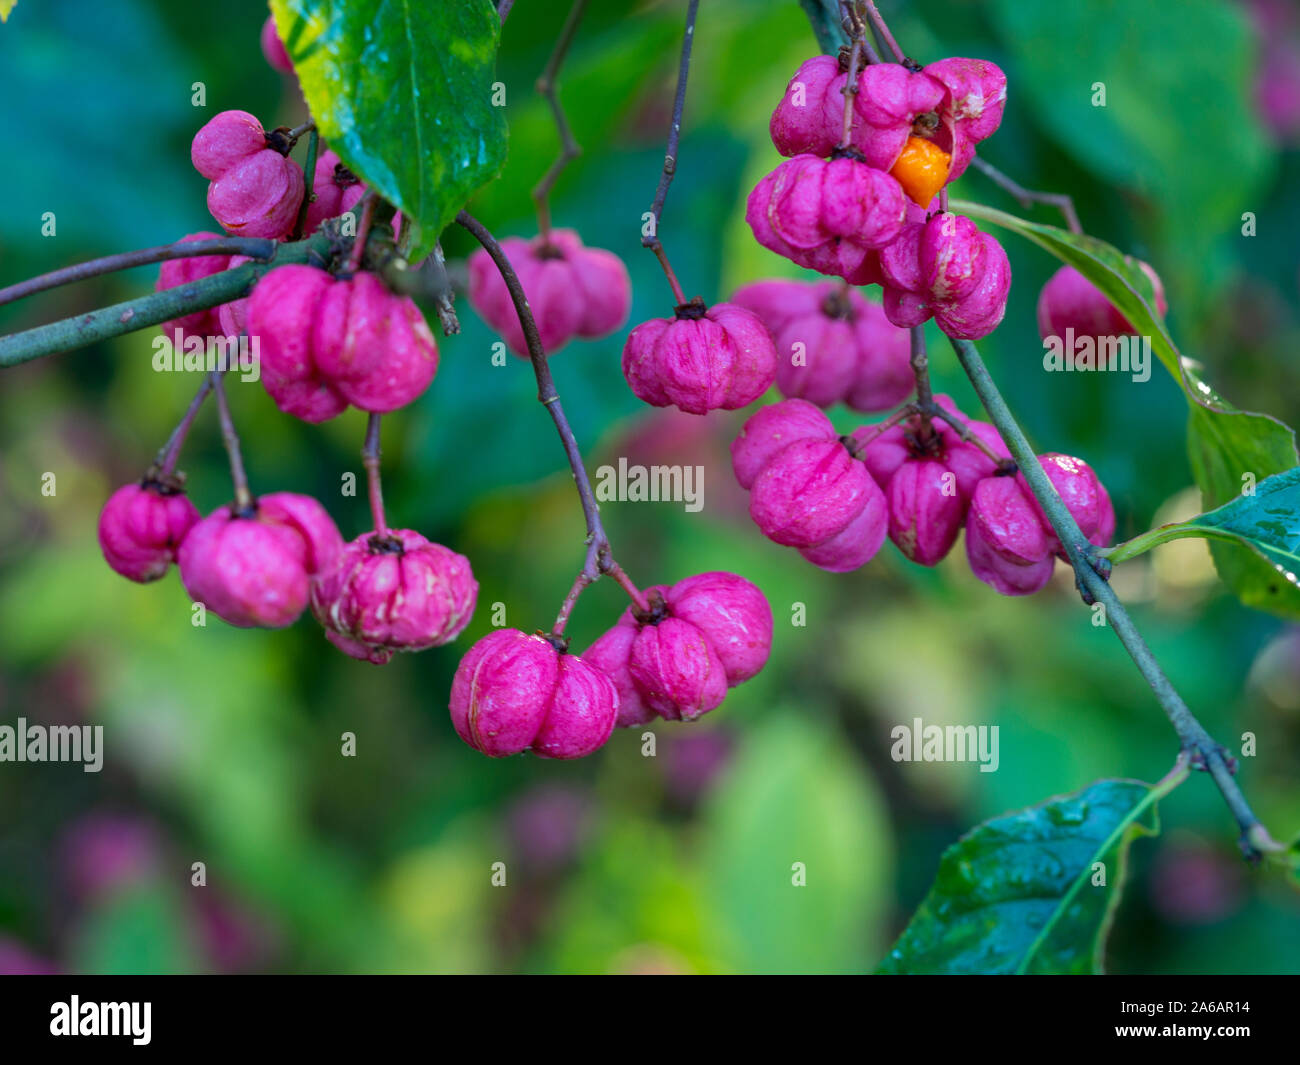 Beautiful and unusual pink lobed berries of the spindle tree (Euonymus europaea) in autumn Stock Photo